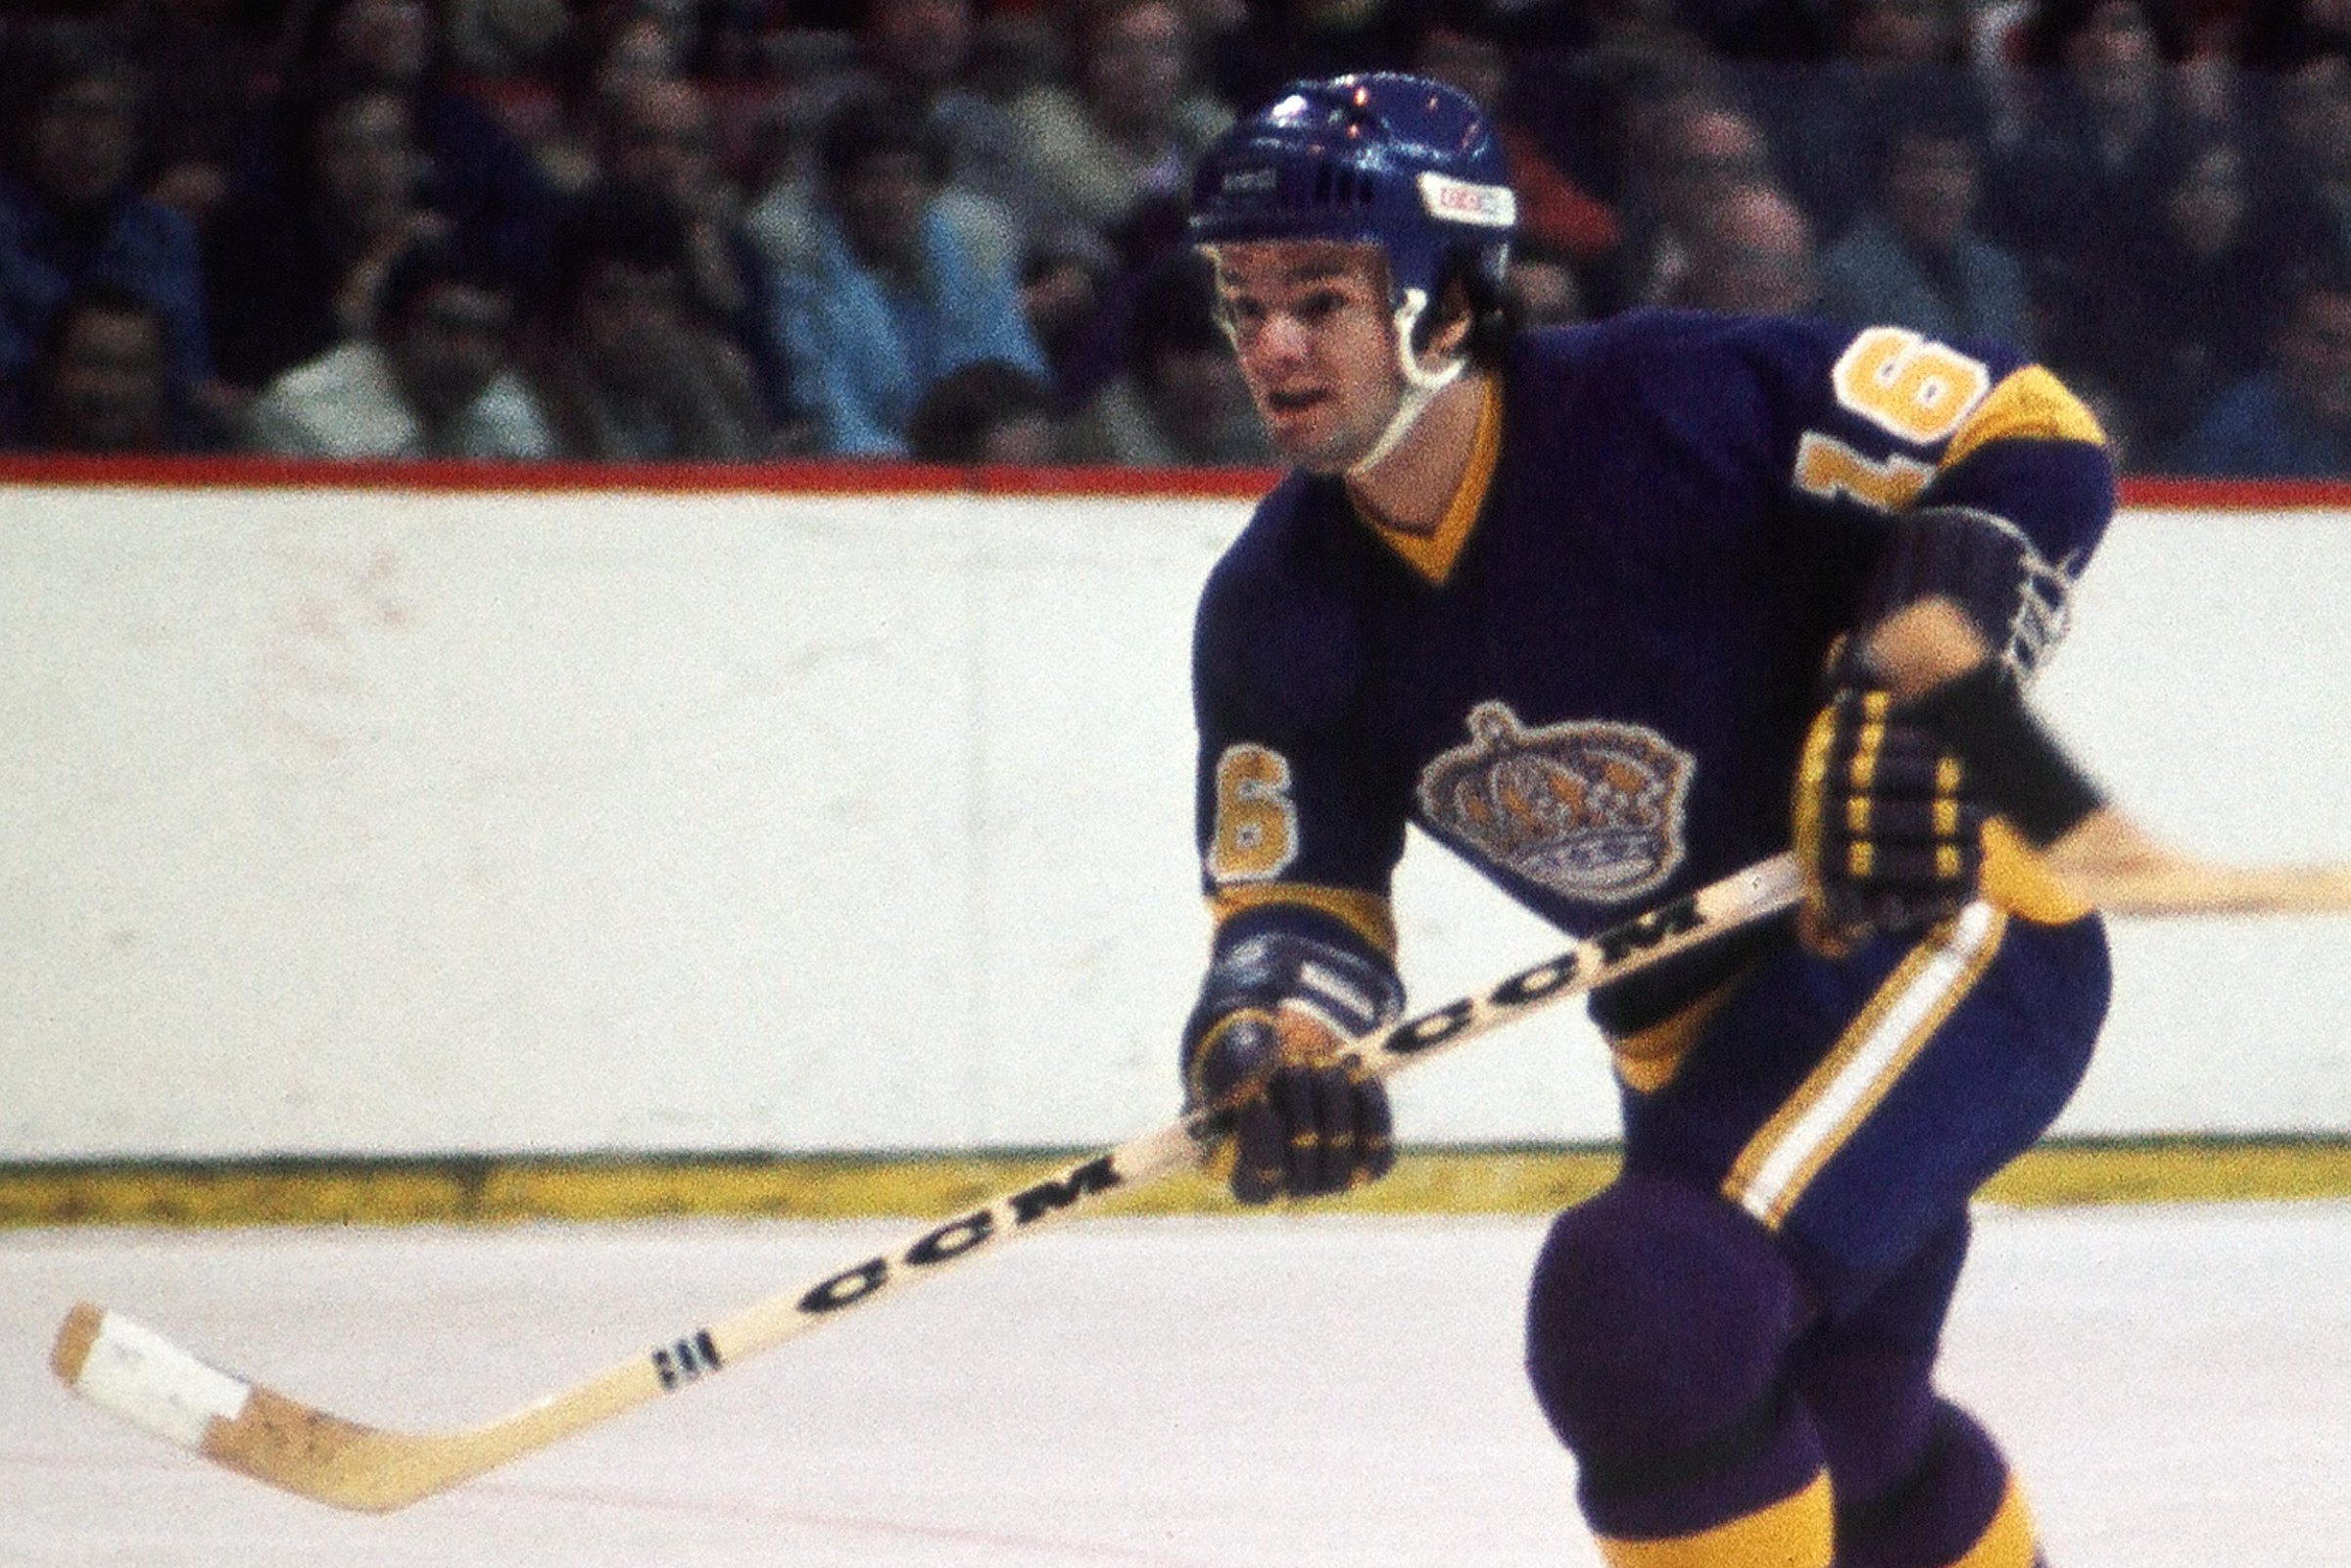 Hockey Hall of Famer Marcel Dionne turns on power play at